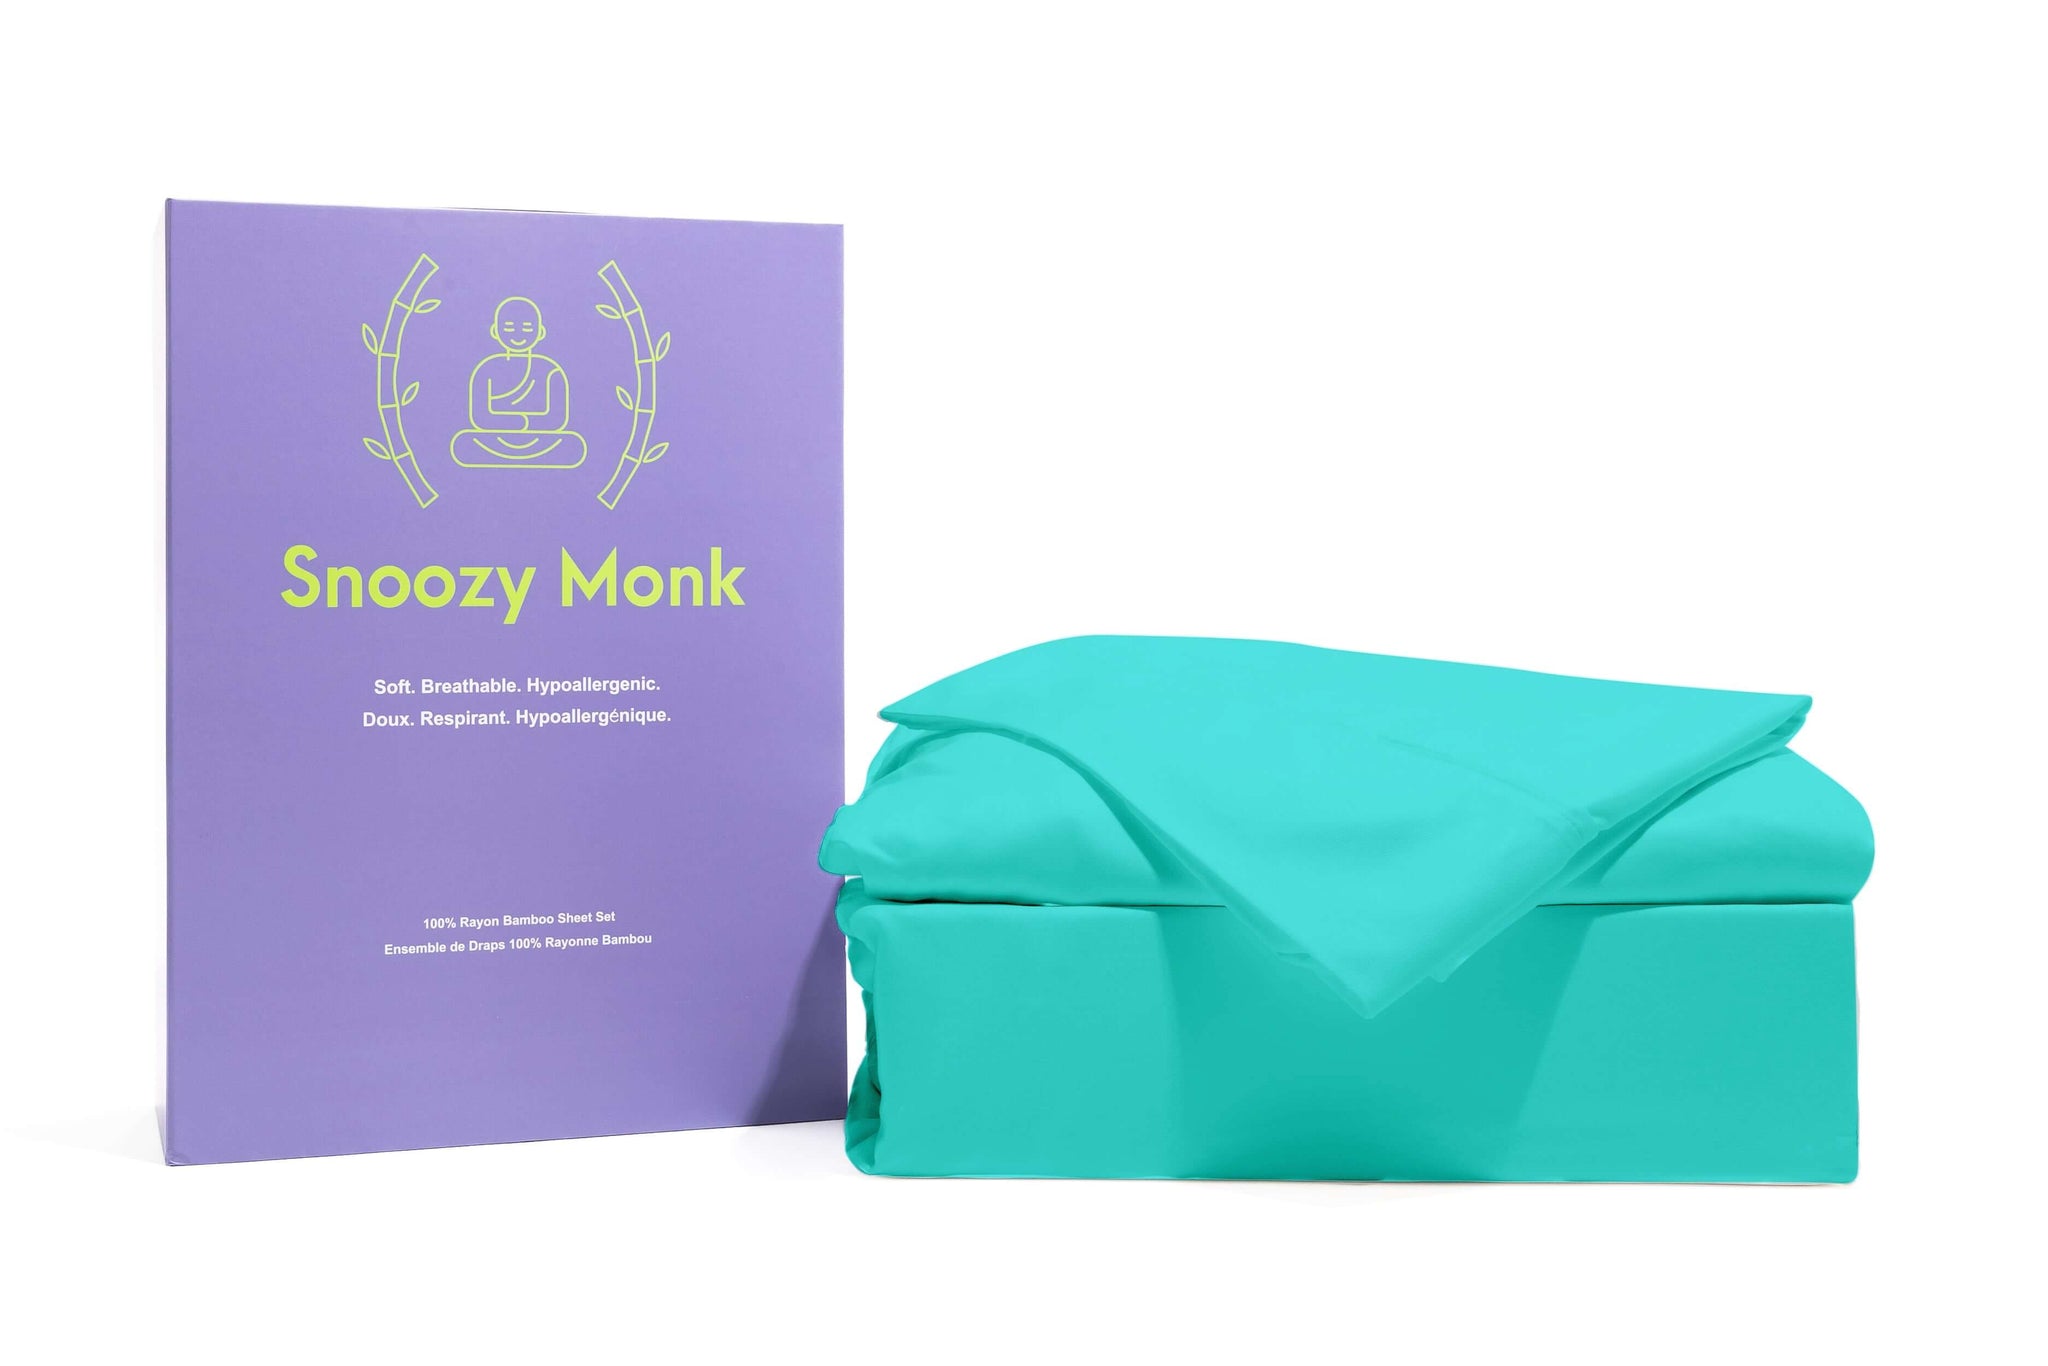 A blue Snoozy Monk Rayon Bamboo Sheet Set with box